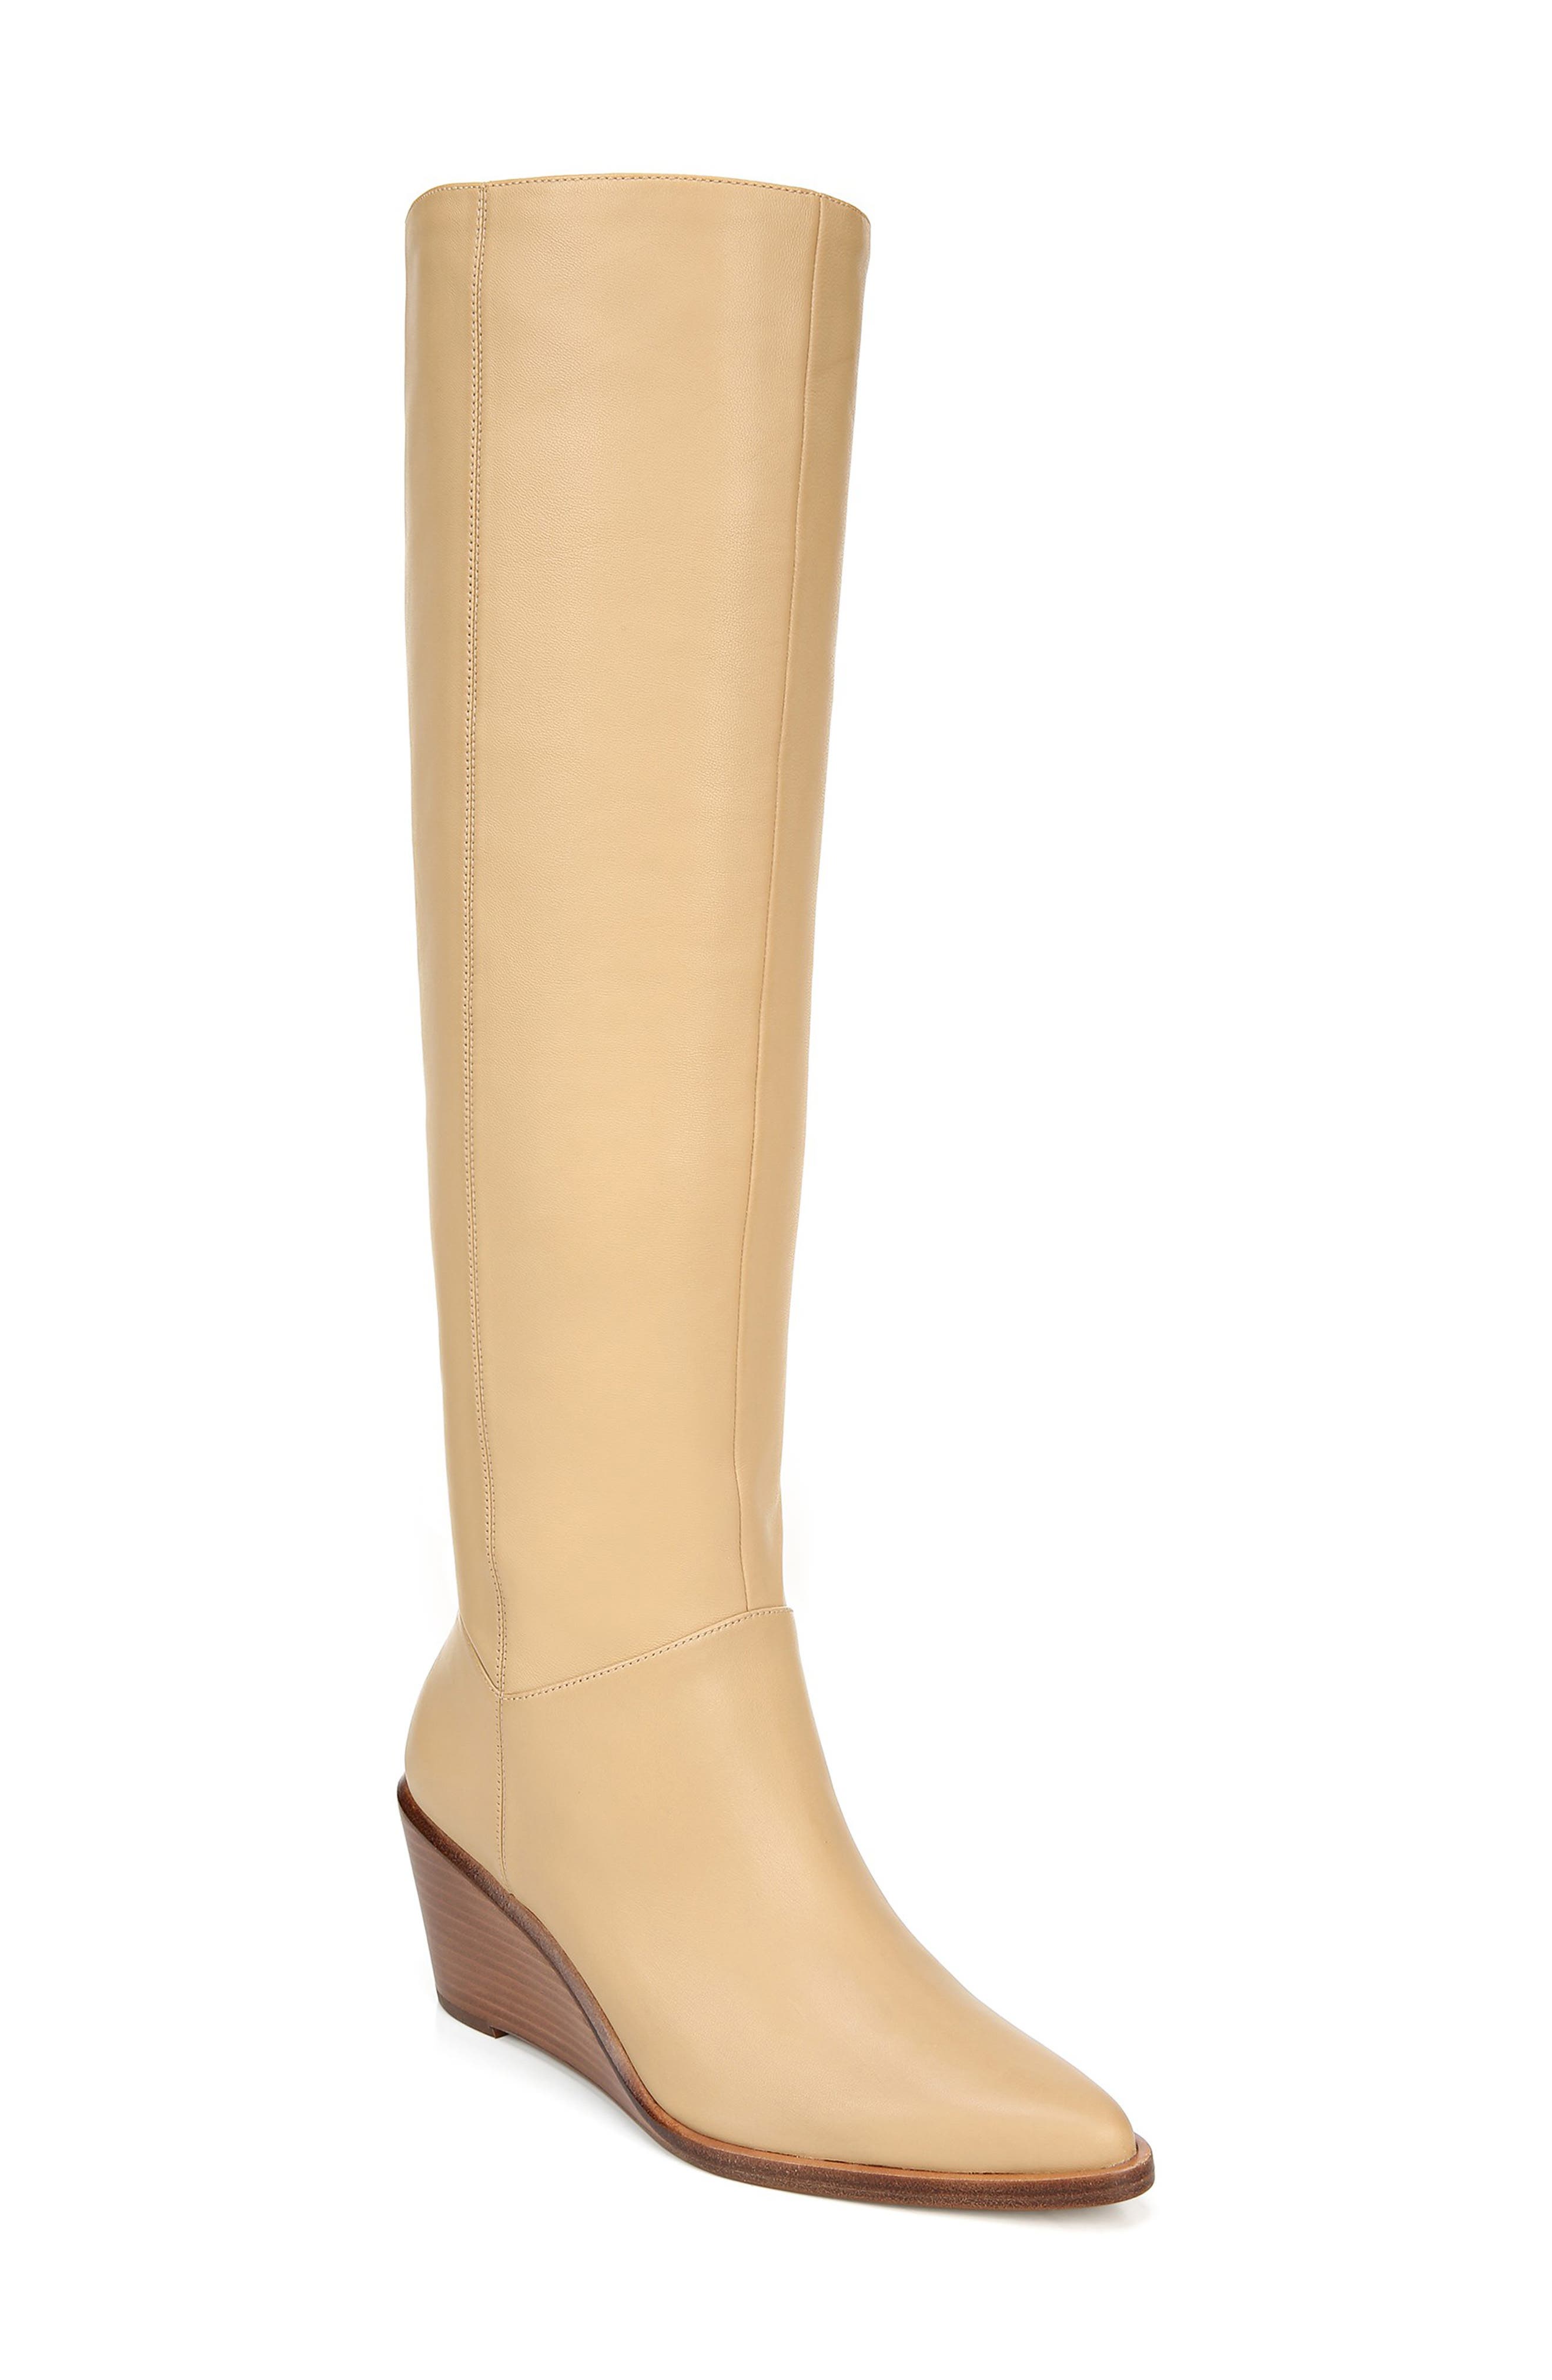 Vince | Marlow Tall Boot | Nordstrom Rack